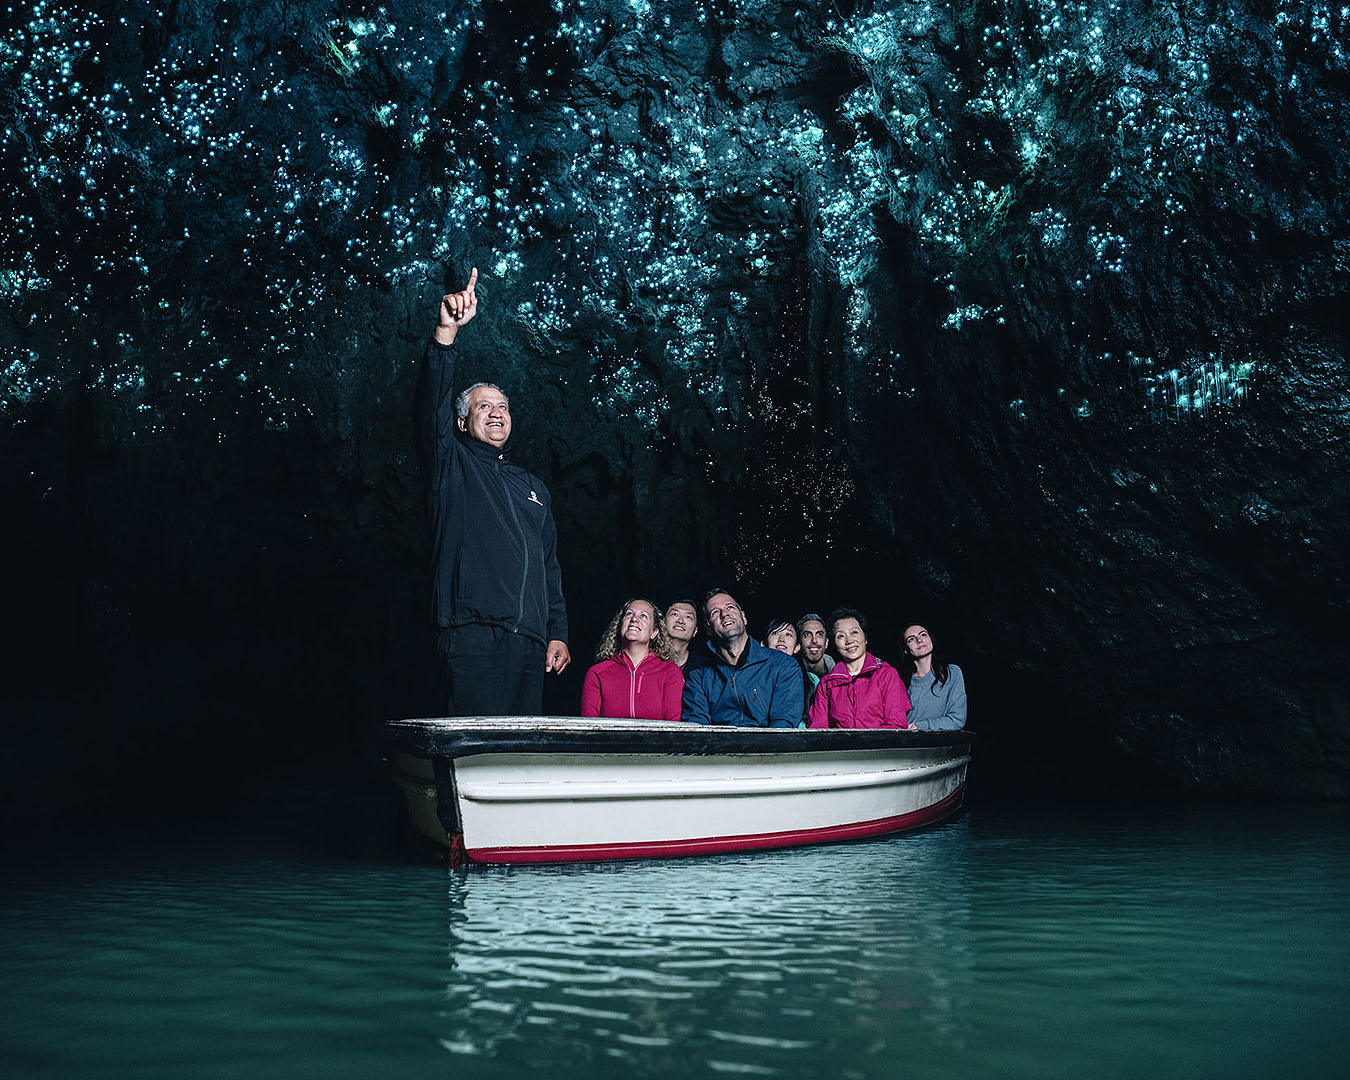 People sit on a boat and gaze up at the glow worms